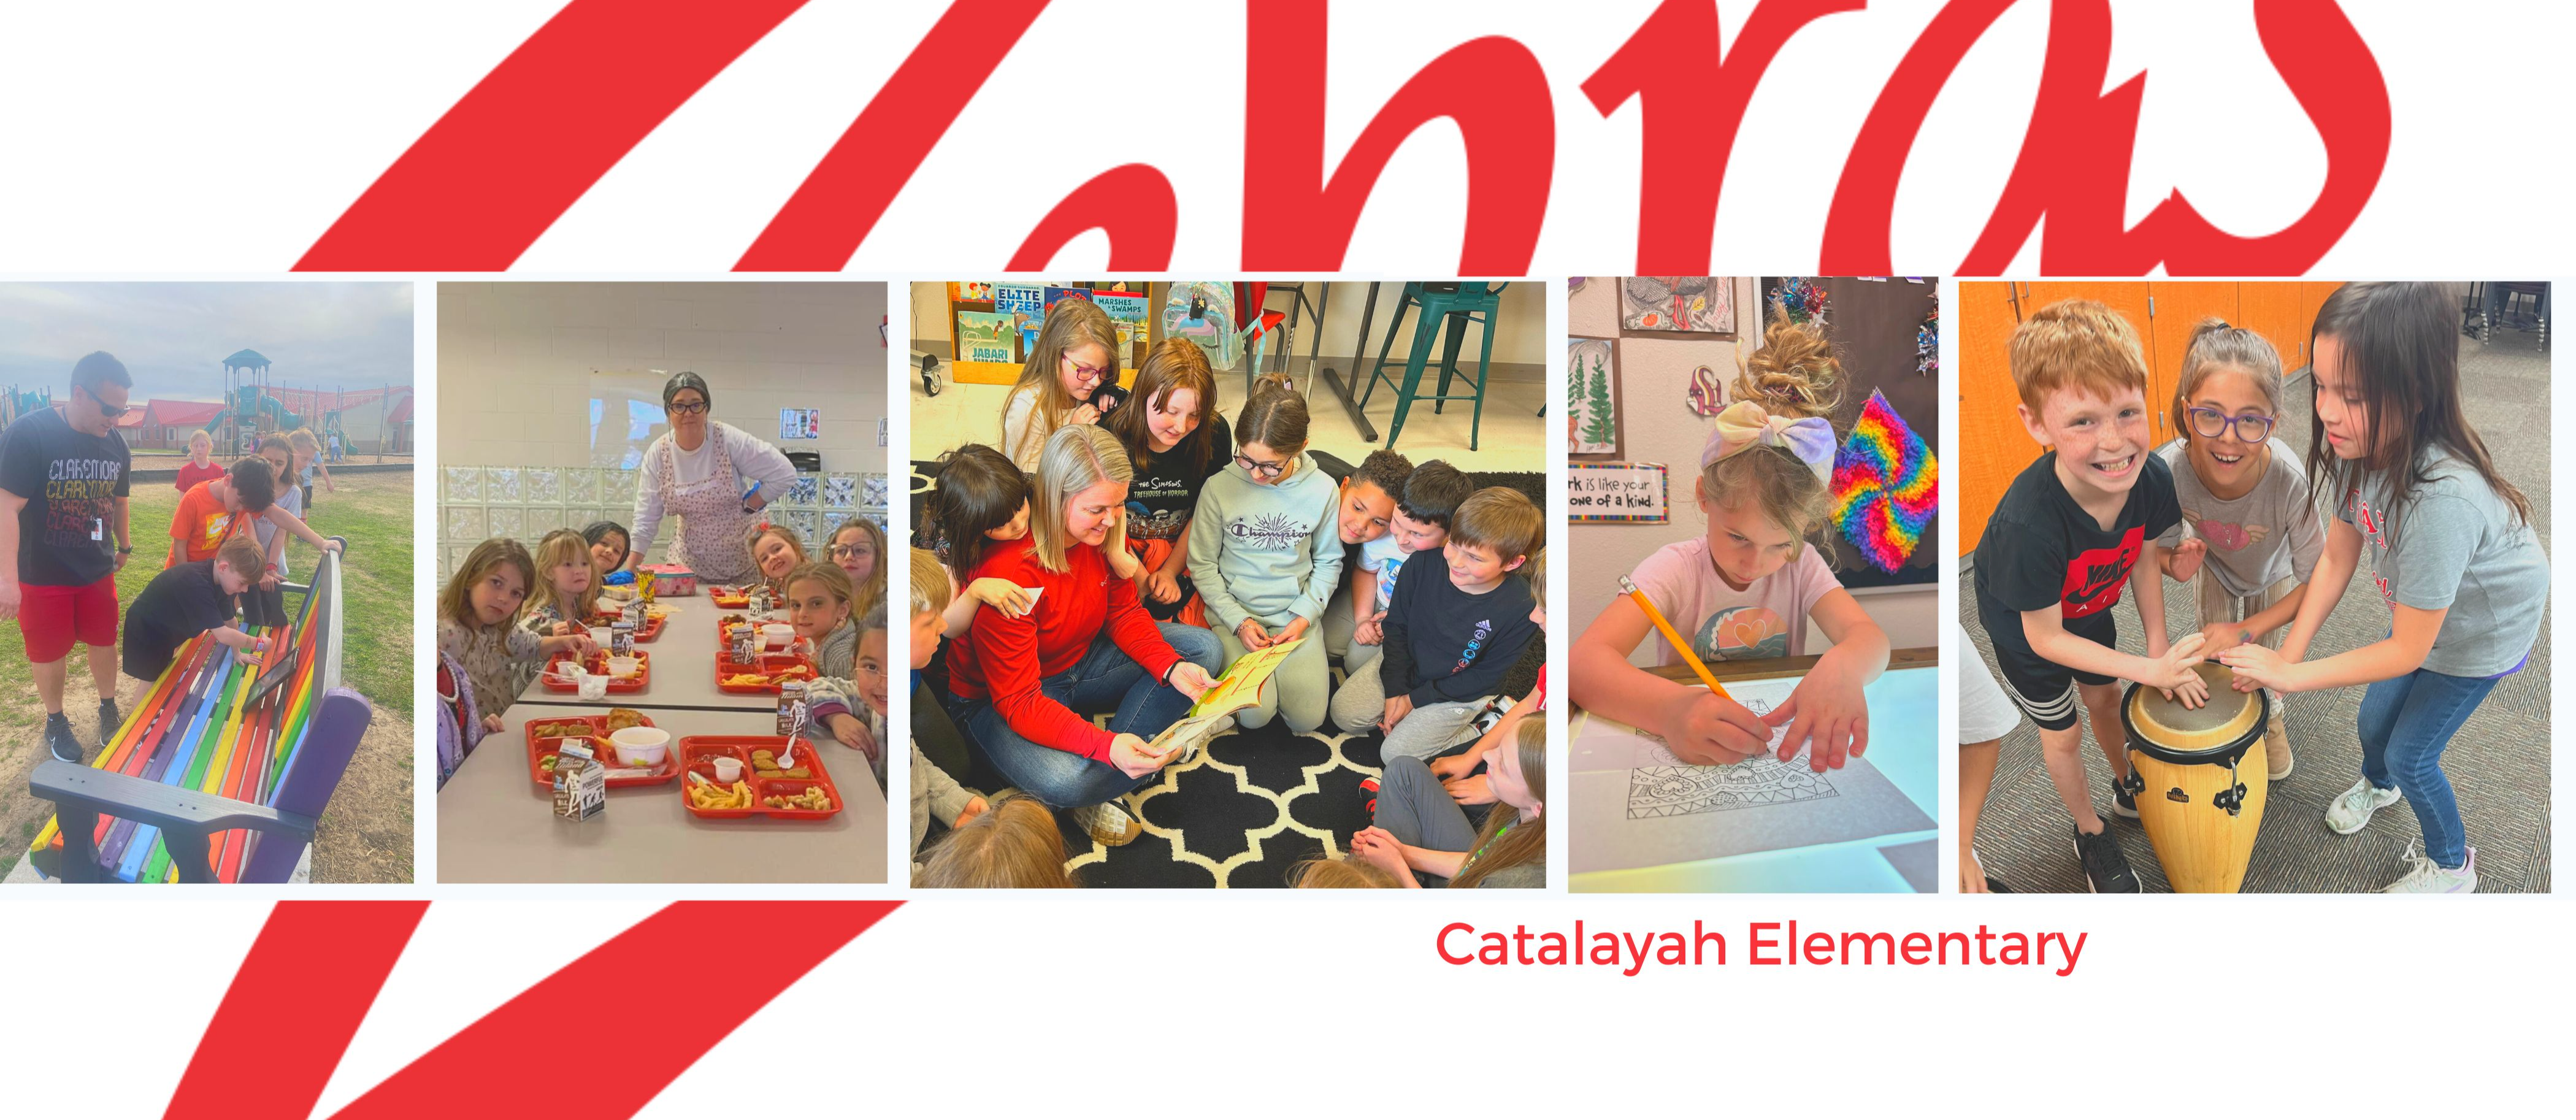 different activities at catalayah